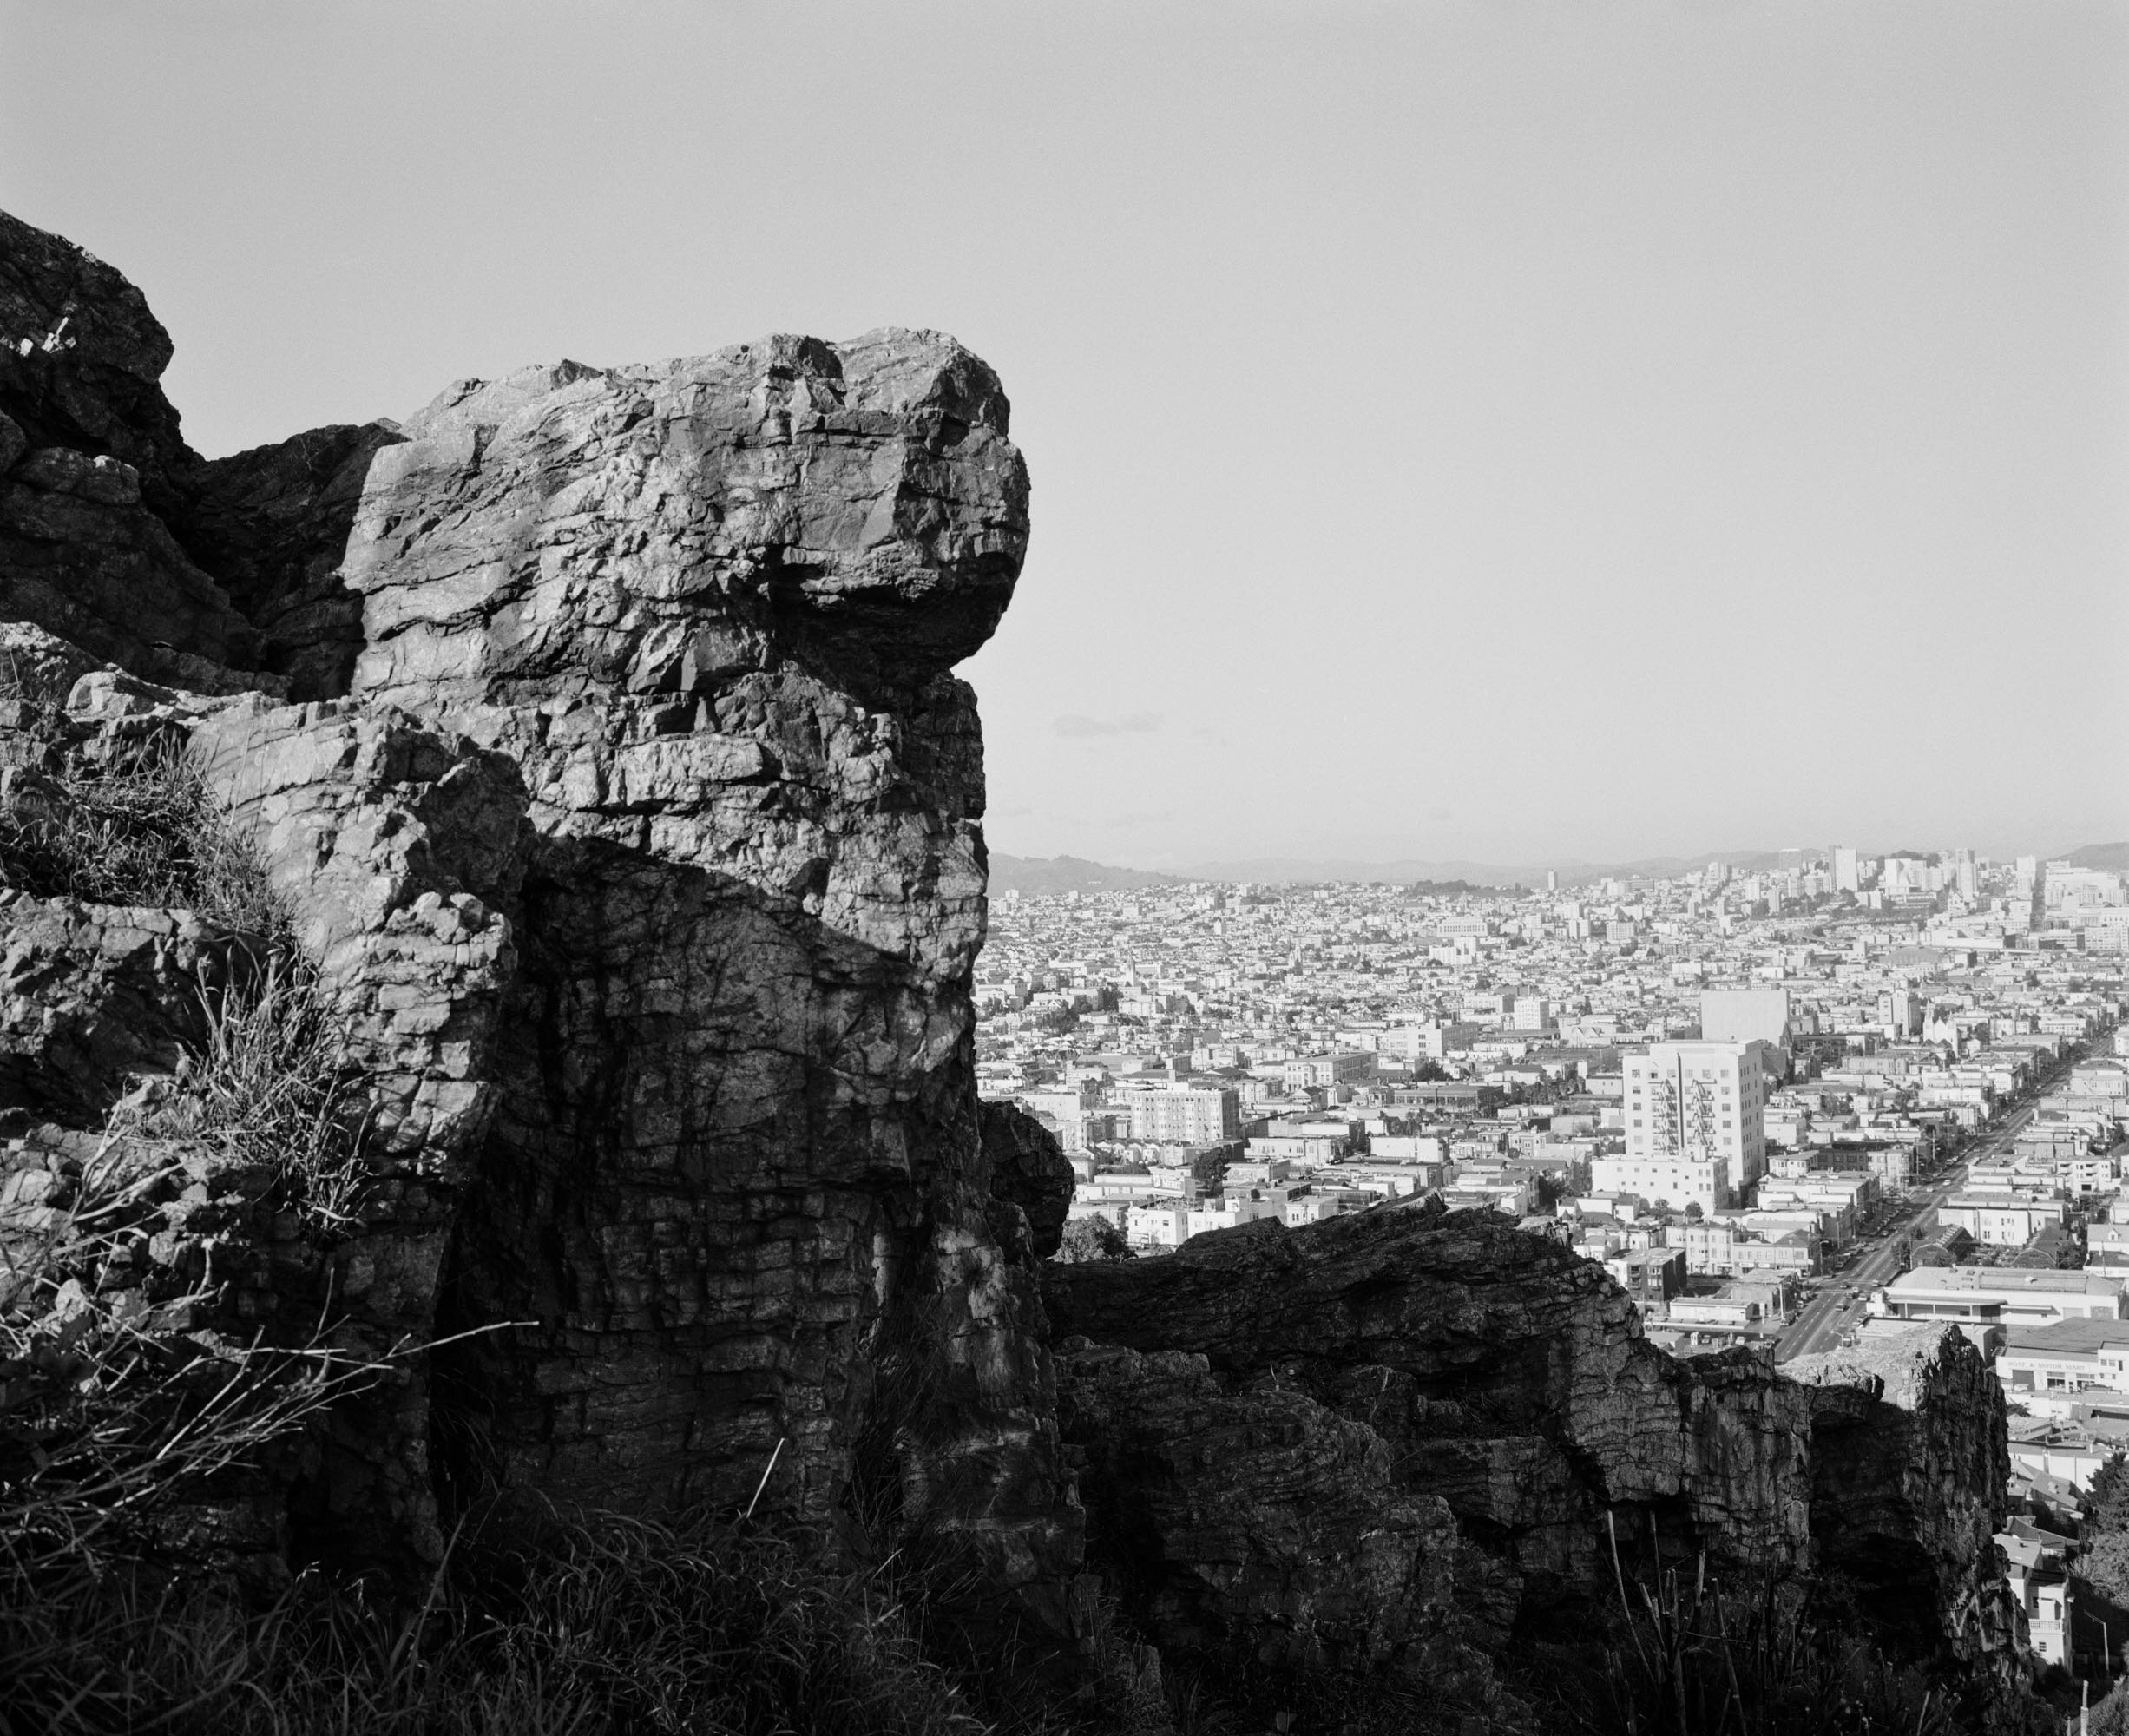 From The Golden City, Rocks and City, 1985.